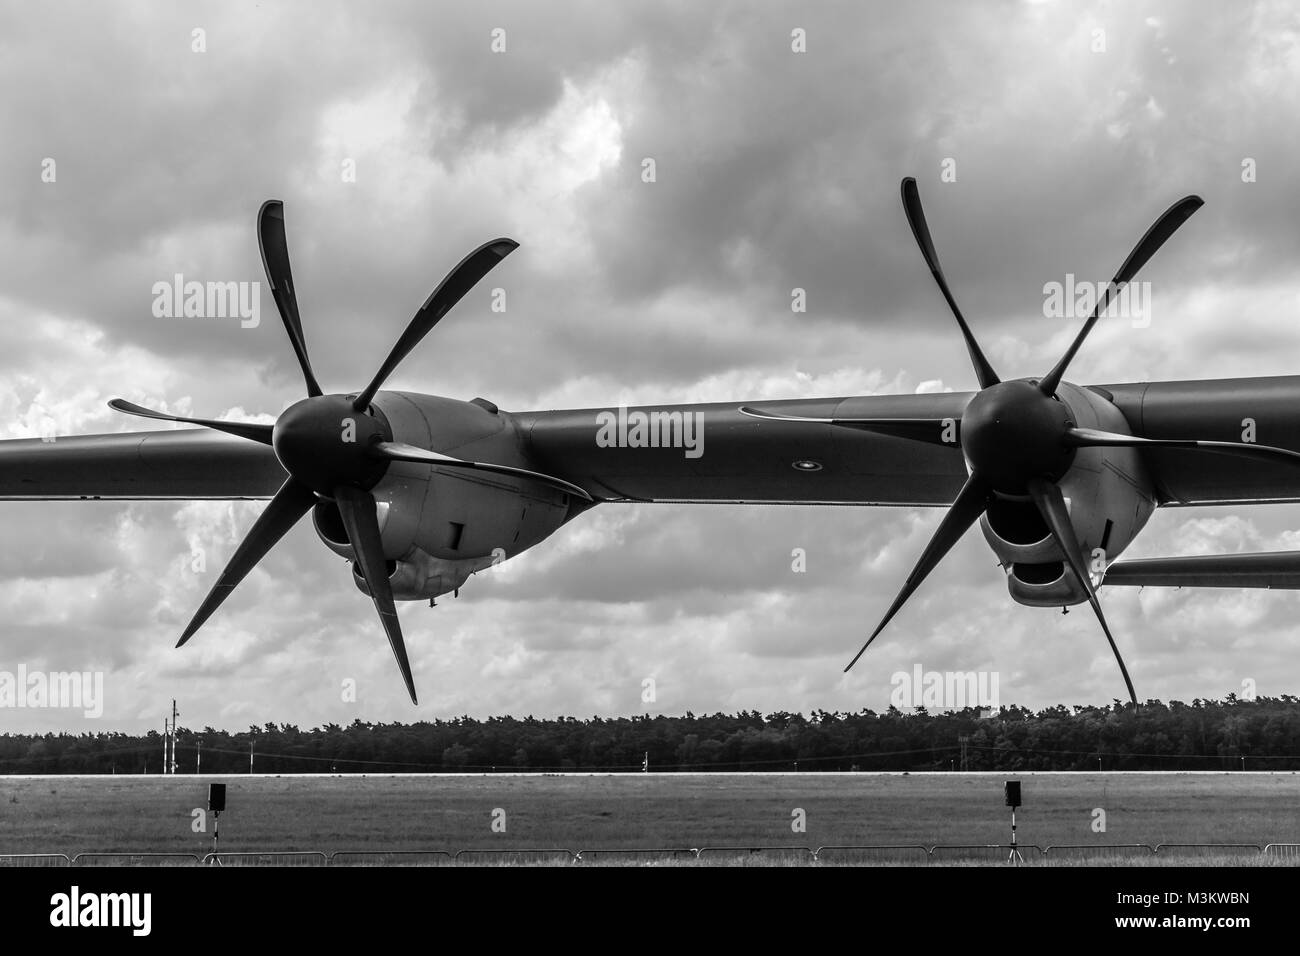 BERLIN, GERMANY - JUNE 02, 2016: Detail of the turboprop military transport aircraft Lockheed Martin C-130J Super Hercules. US Air Force. Black and white. Exhibition ILA Berlin Air Show 2016 Stock Photo